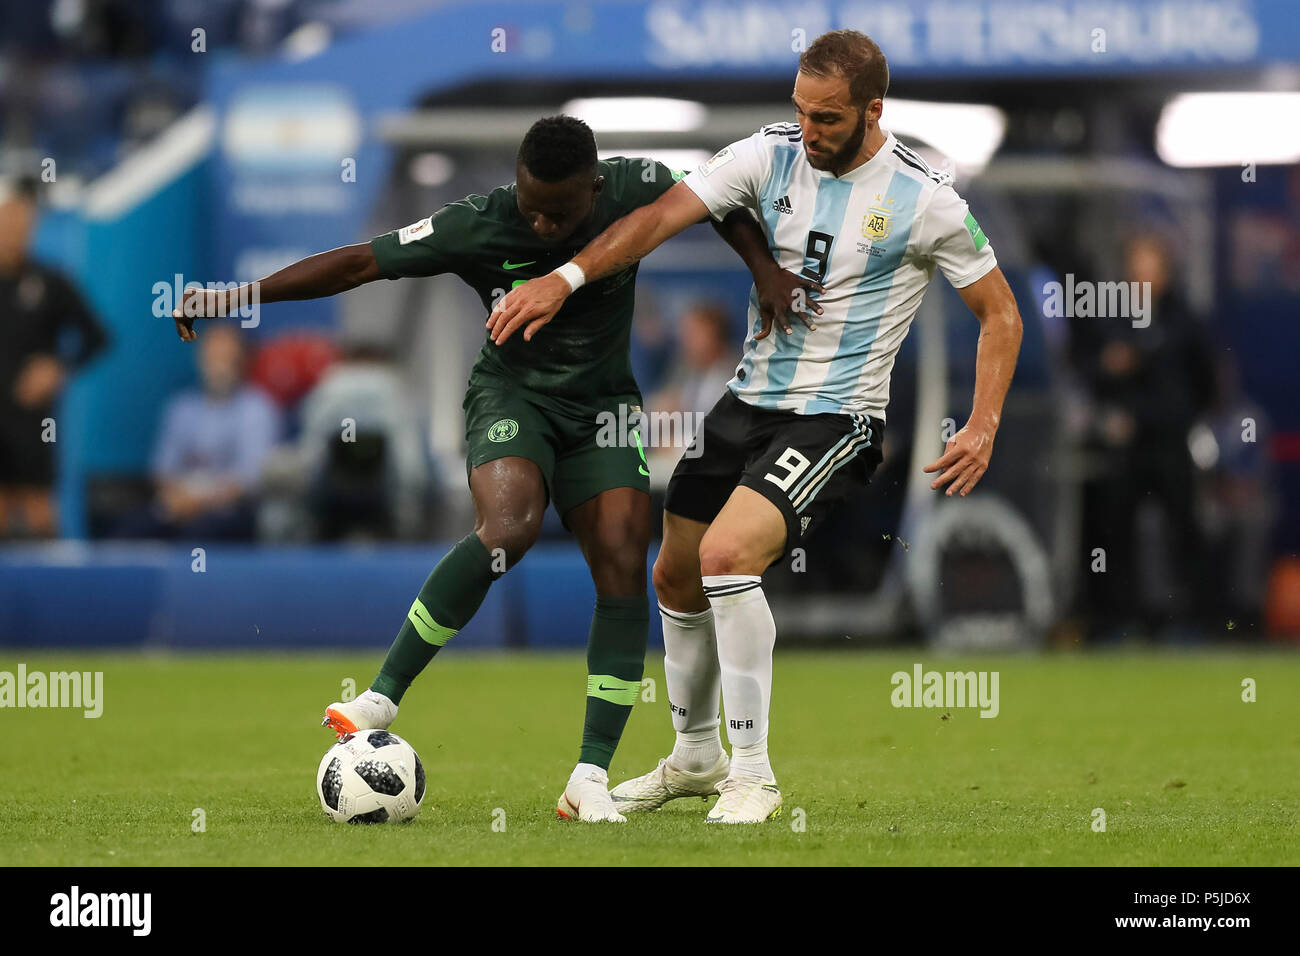 St Petersburg, Russia, 27 June 2018. Oghenekaro Etebo of Nigeria and Gonzalo Higuain of Argentina during the 2018 FIFA World Cup Group D match between Nigeria and Argentina at Saint Petersburg Stadium on June 26th 2018 in Saint Petersburg, Russia. (Photo by Daniel Chesterton/phcimages.com) Credit: PHC Images/Alamy Live News Stock Photo